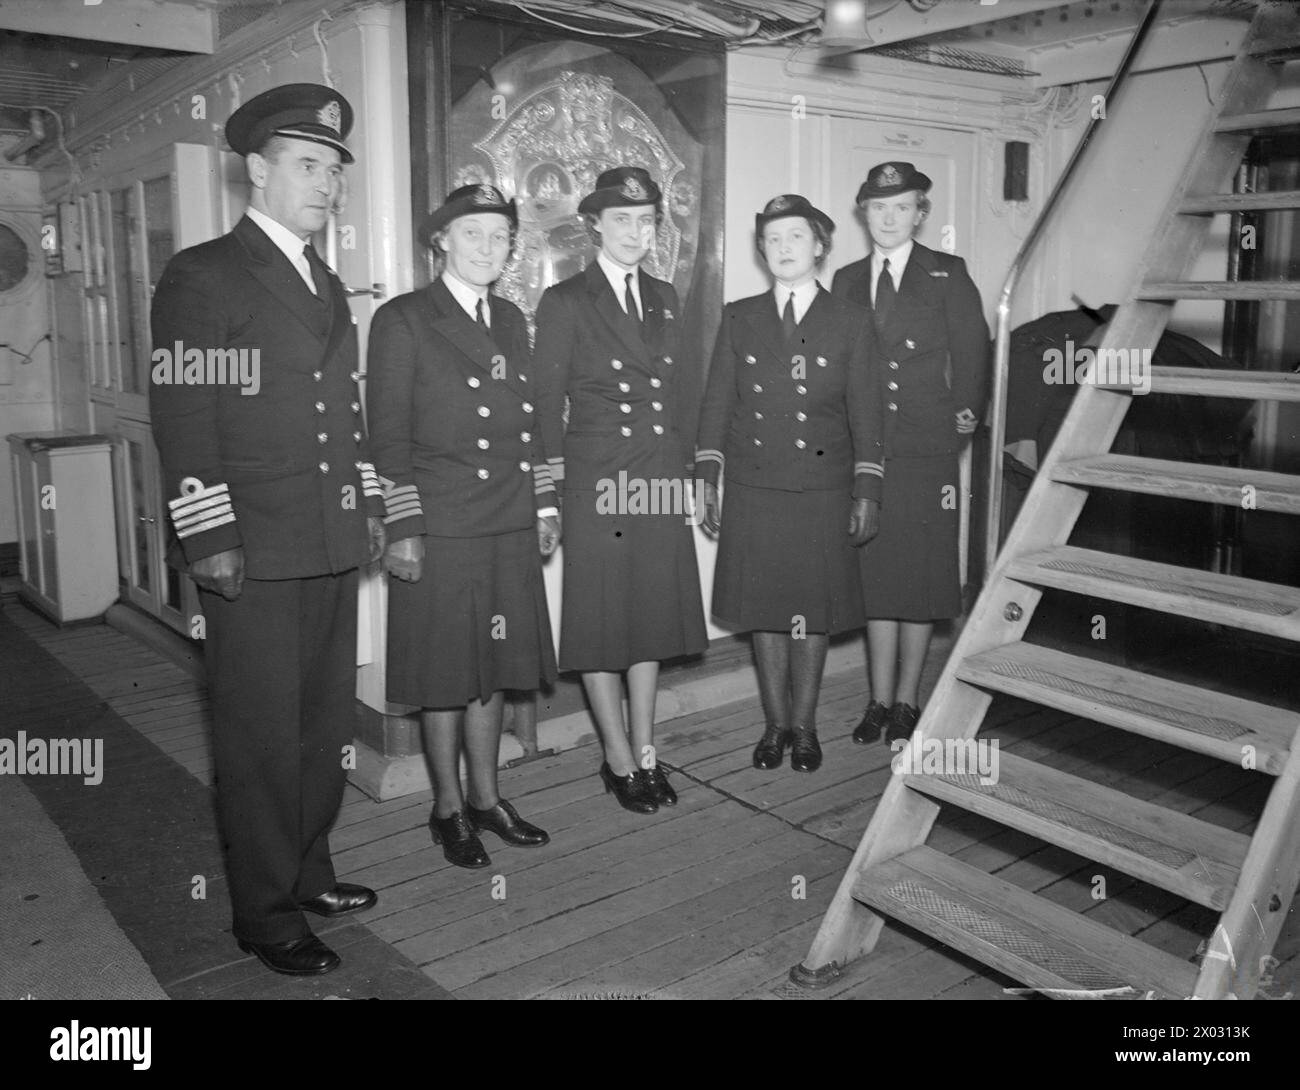 THE DUCHESS OF KENT WITH WRENS IN SCOTLAND. 21 OCTOBER, AT ROSYTH AND GRANTON NEAR EDINBURGH. DURING THE VISIT OF HRH THE DUCHESS OF KENT, COMMANDANT OF THE WRNS, TO NAVAL BASES IN SCOTLAND WHEN SHE INSPECTED MEMBERS OF THE WRNS, AND WATCHED THEM AT WORK. - In HMS COCHRANE, left to right: Captain Cyril Coltart, CVO, RN; Mrs V C S Boyd, Superintendent WRNS; The Duchess of Kent; Second Officer E M Adshead; and Lady Herbert, Lady in Waiting  Coltart, Cyril George Bucknill, Boyd, Violet Constance Sophie, Marina, Princess (Duchess of Kent), Herbert, Mary Dorothea, Royal Navy, HMS Cochrane, Shore Es Stock Photo